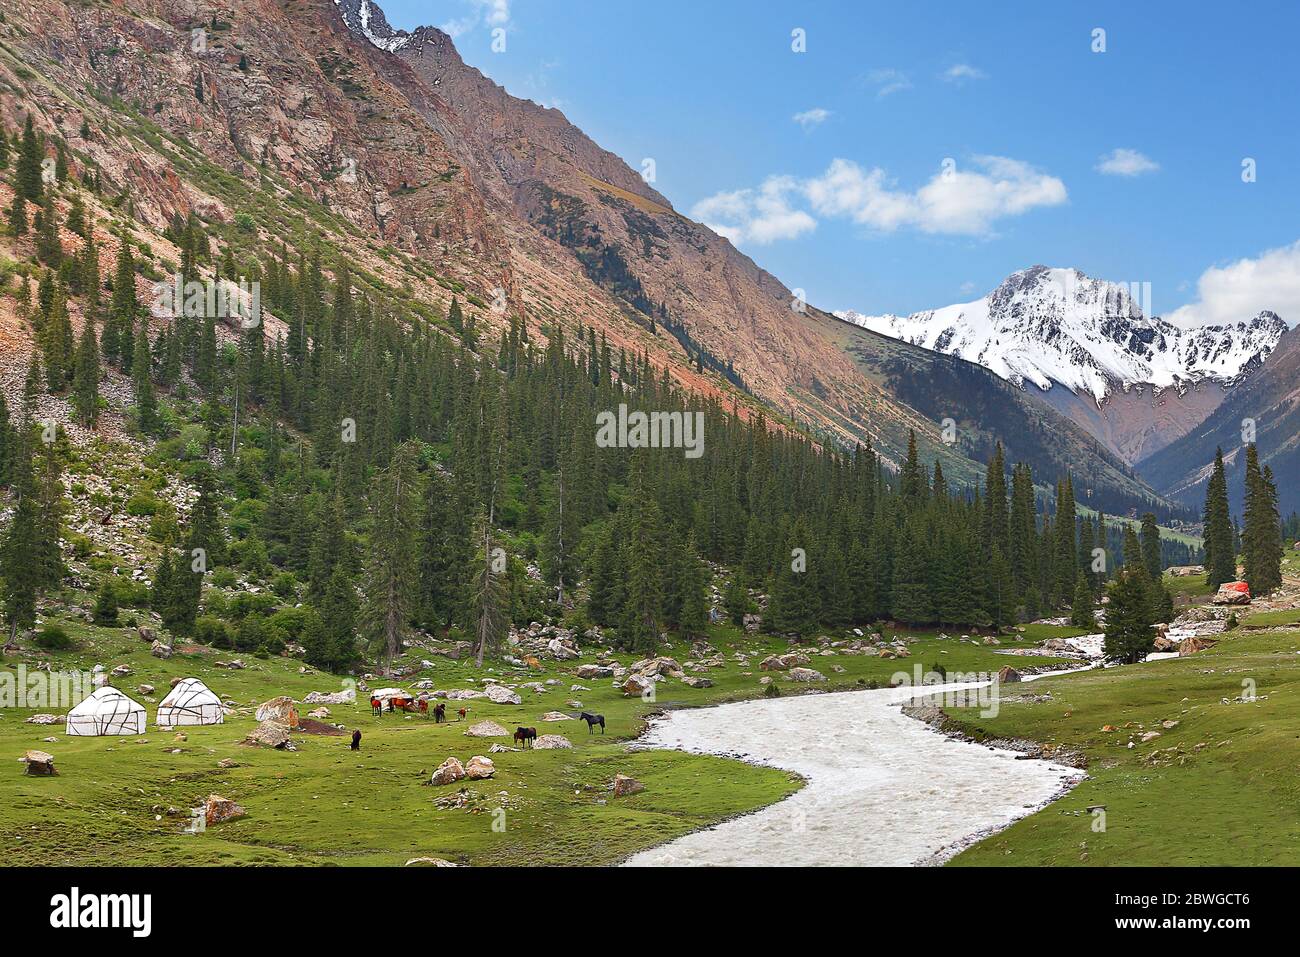 View over the Barskaun Gorge with nomadic tents and horses, Kyrgyzstan Stock Photo